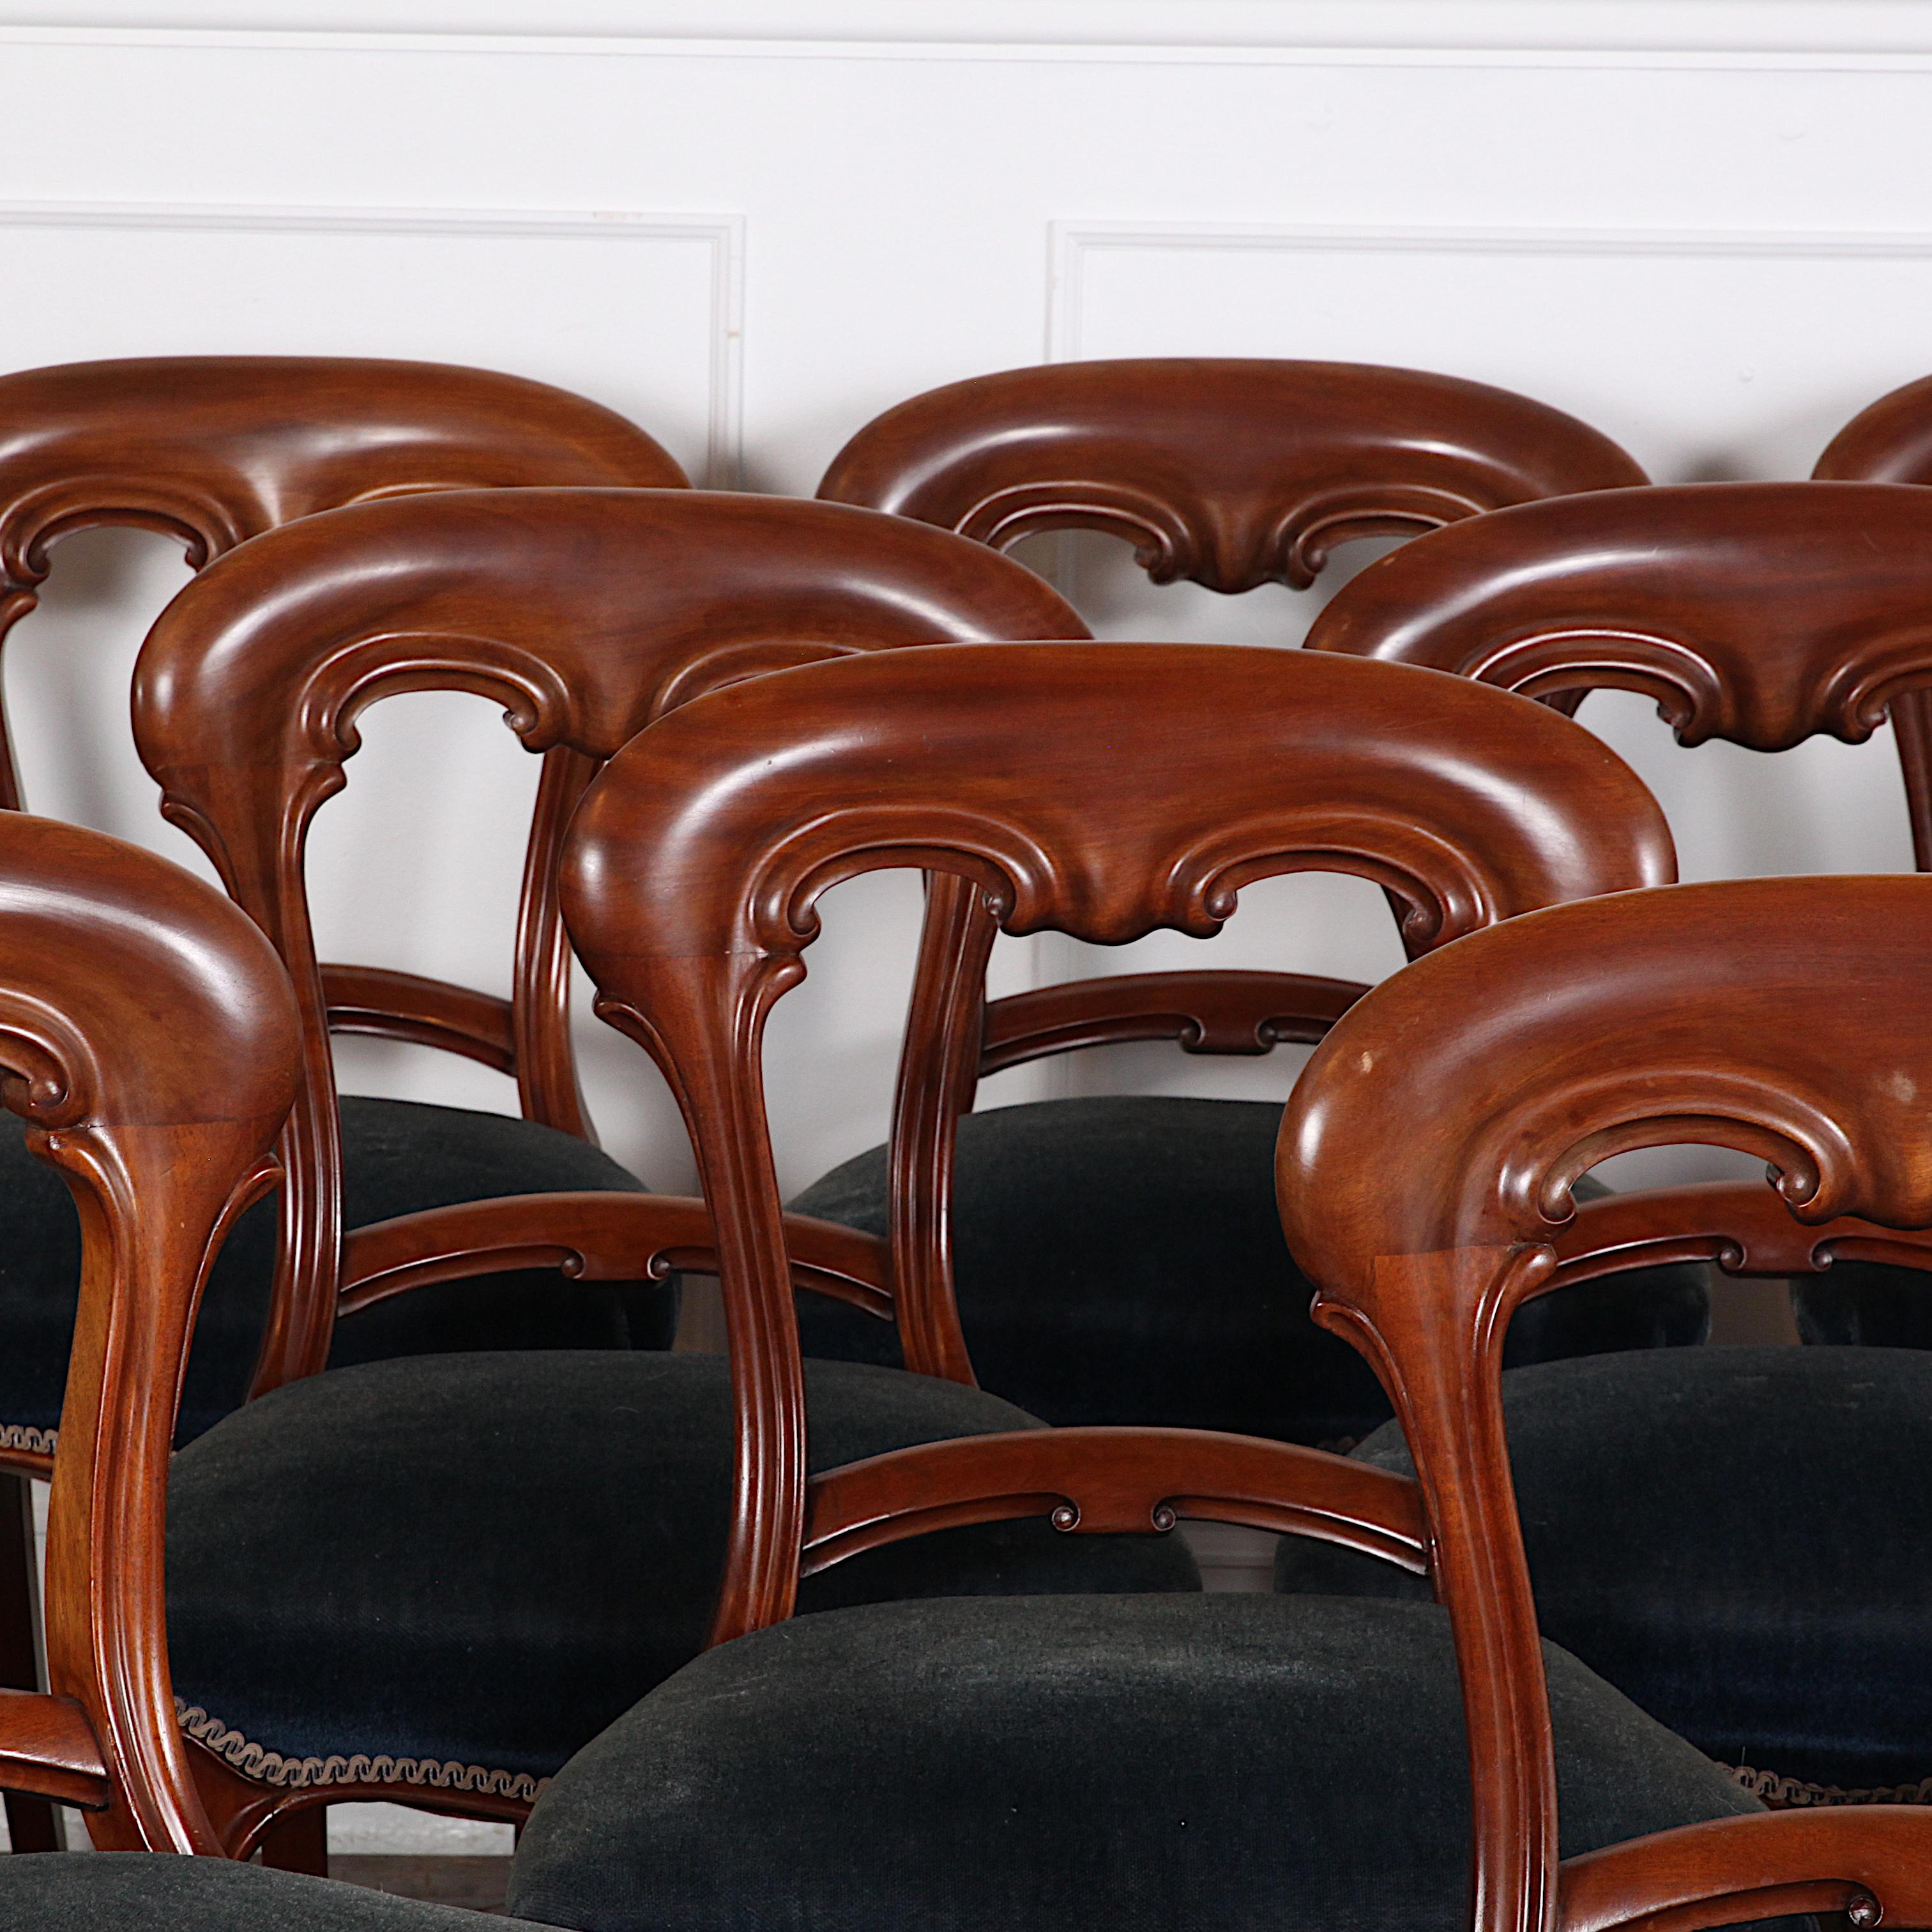 Hard-to-find set of 12 English Victorian period dining chairs in Mahogany with shaped carved backs and elegant cabriole front legs.